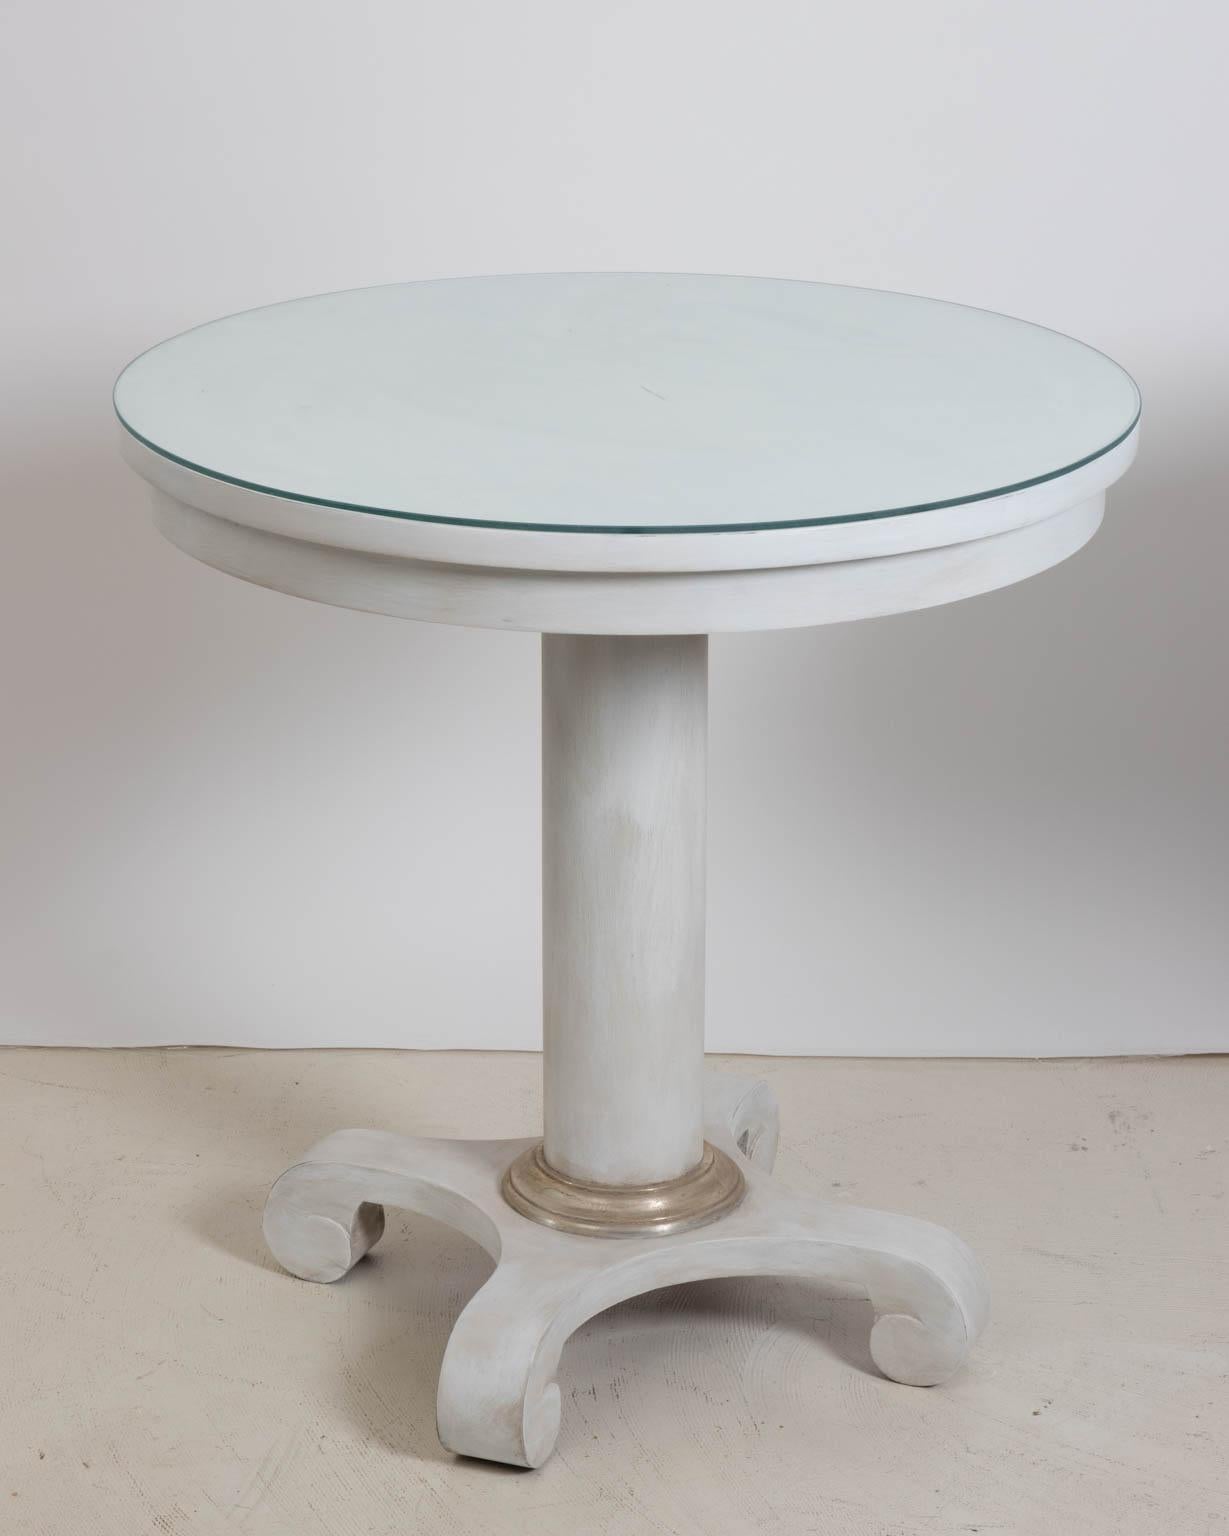 Empire Pair of White Painted Rounded Tables by Mitchell Gold and Bob Williams